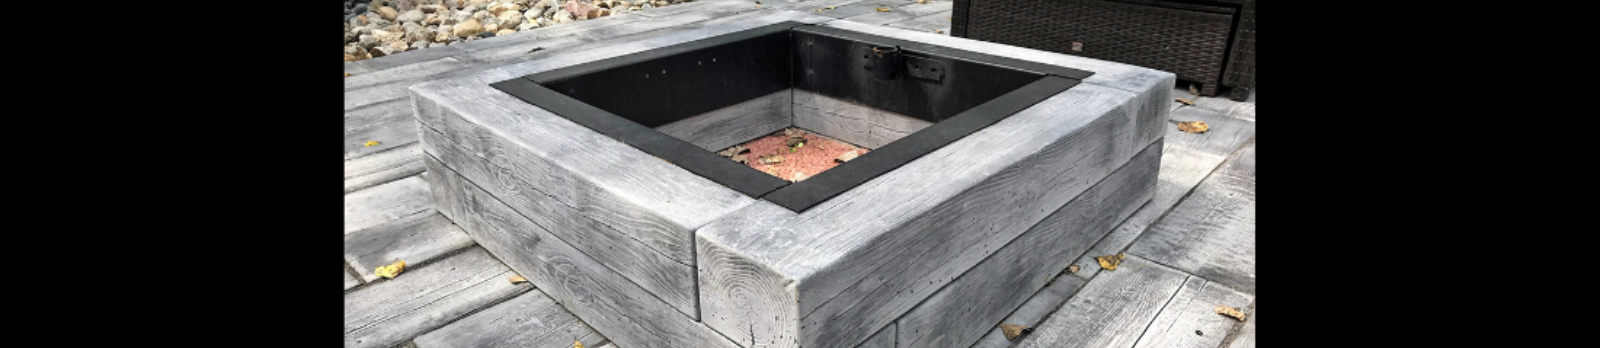 Fire Rings & Fire Pit Kits